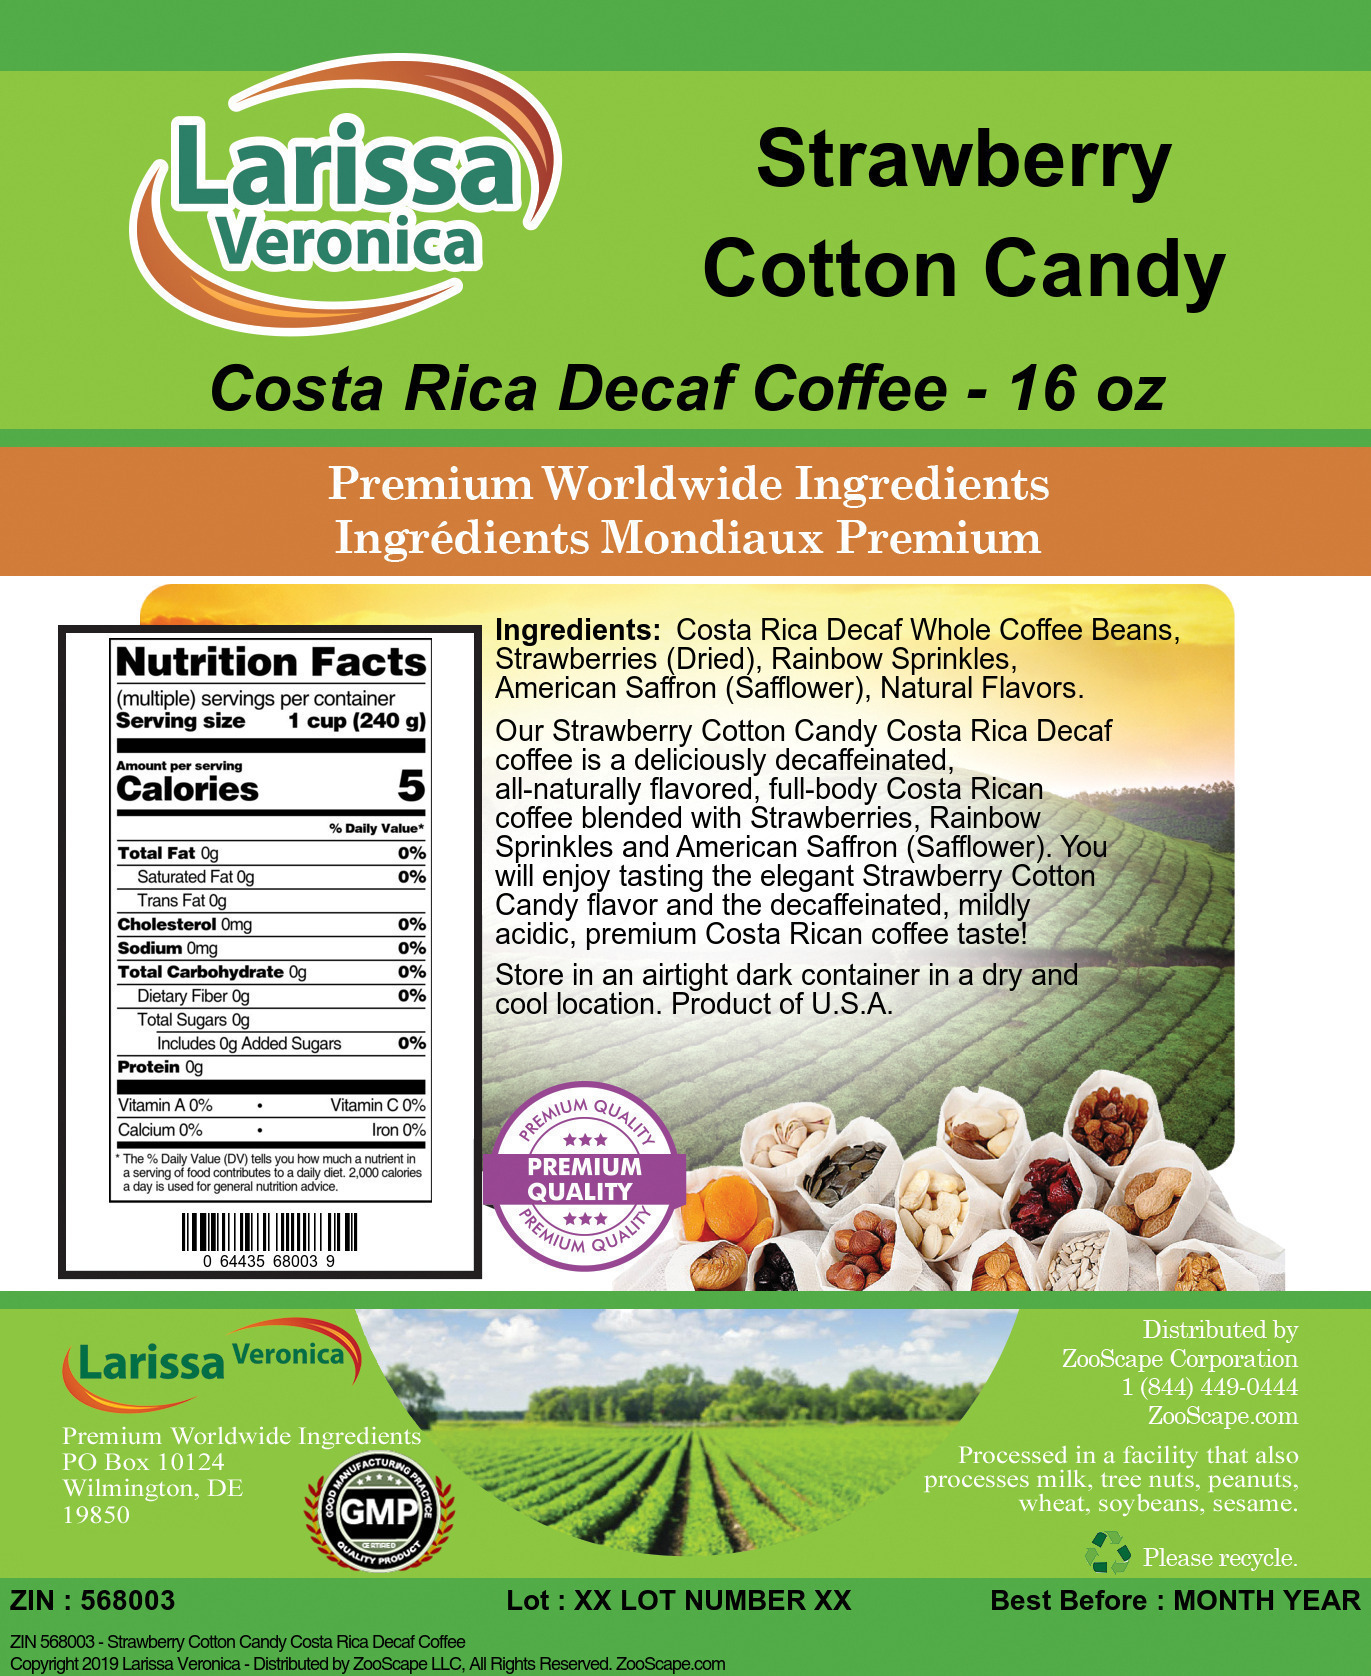 Strawberry Cotton Candy Costa Rica Decaf Coffee - Label